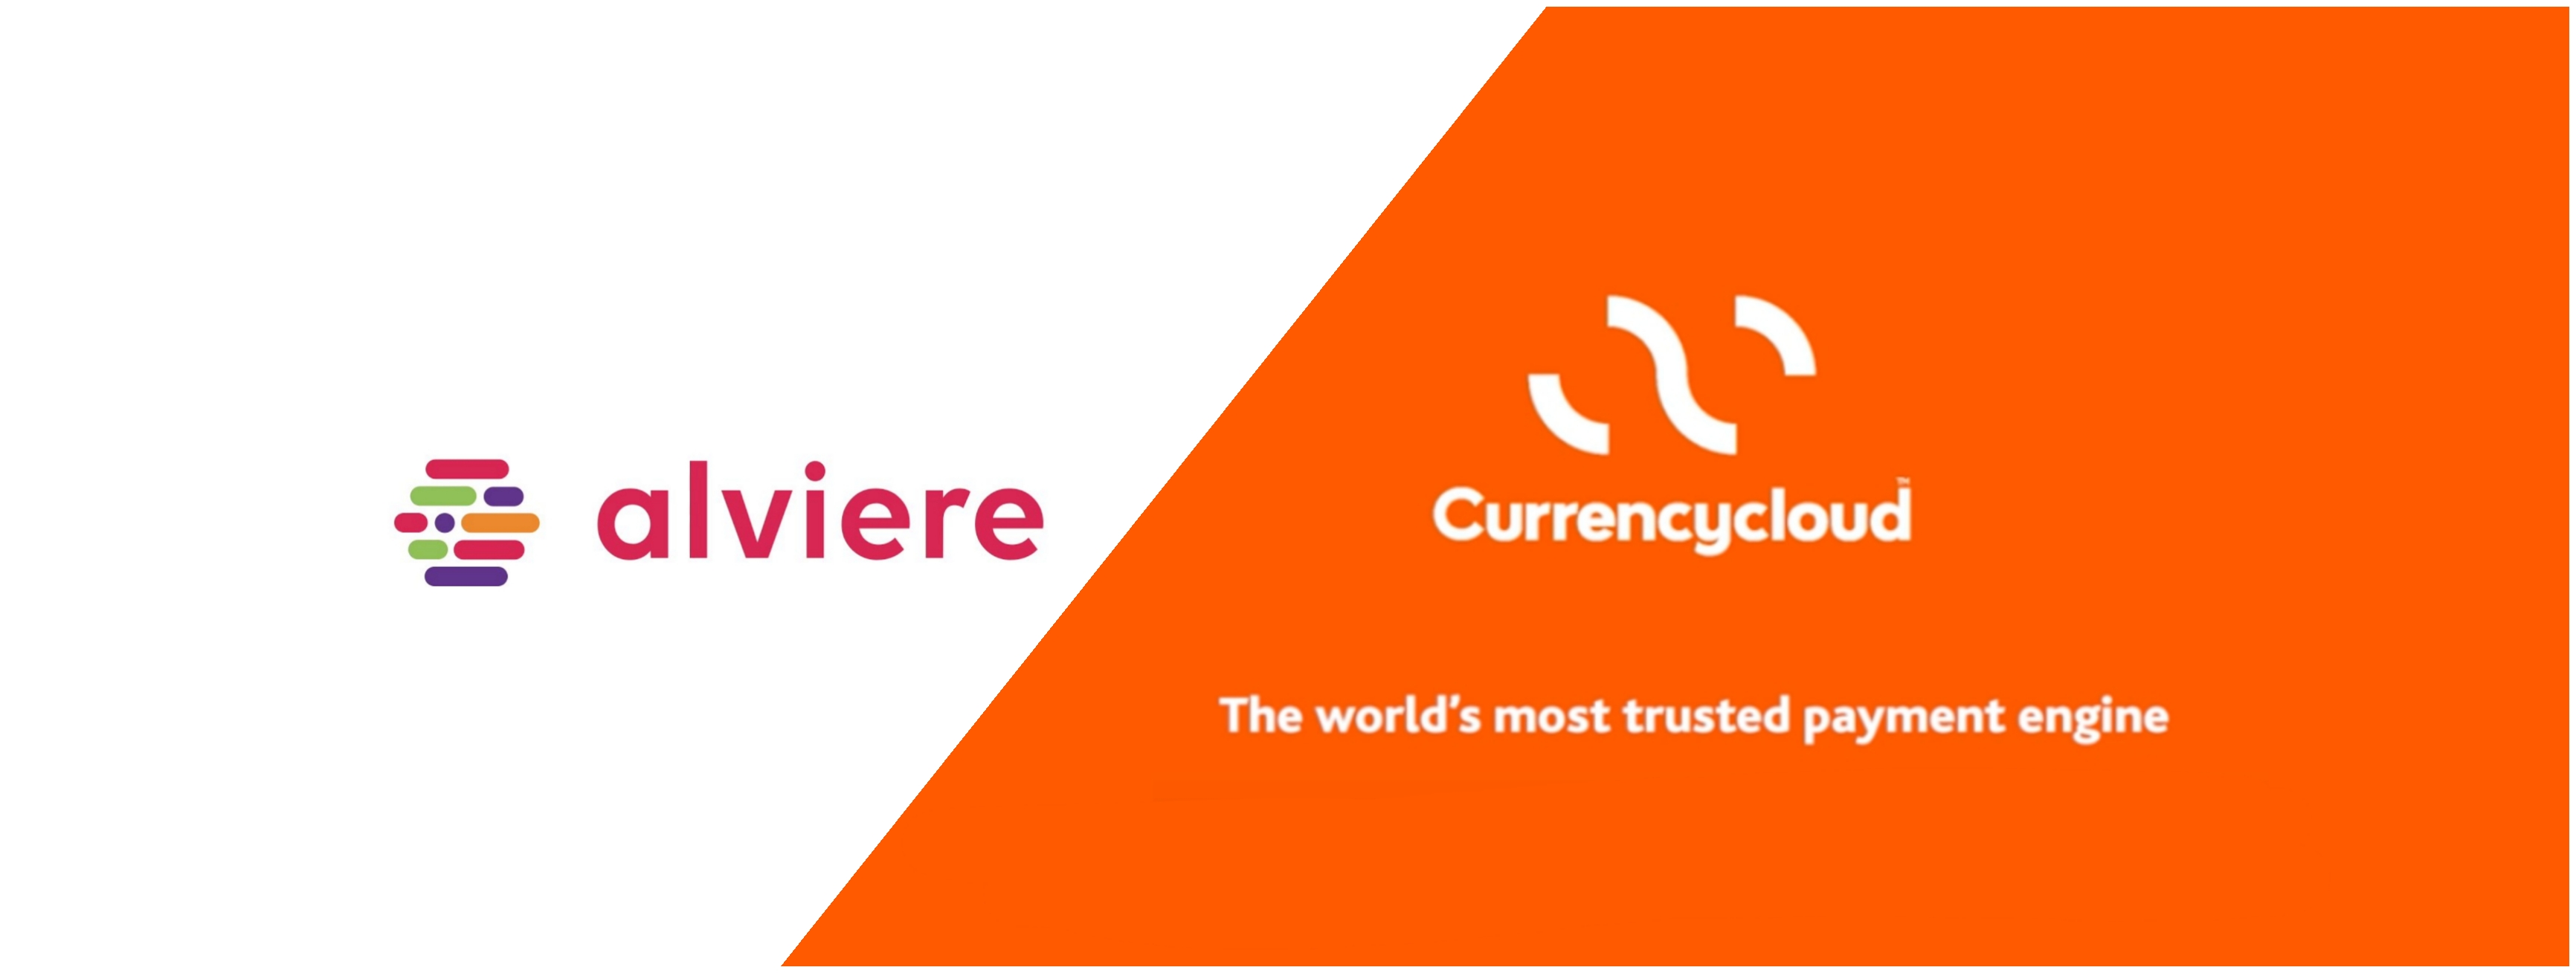 Alviere & Currencycloud Partner to Provide Multi-currency Cross-border Embedded Finance Solution